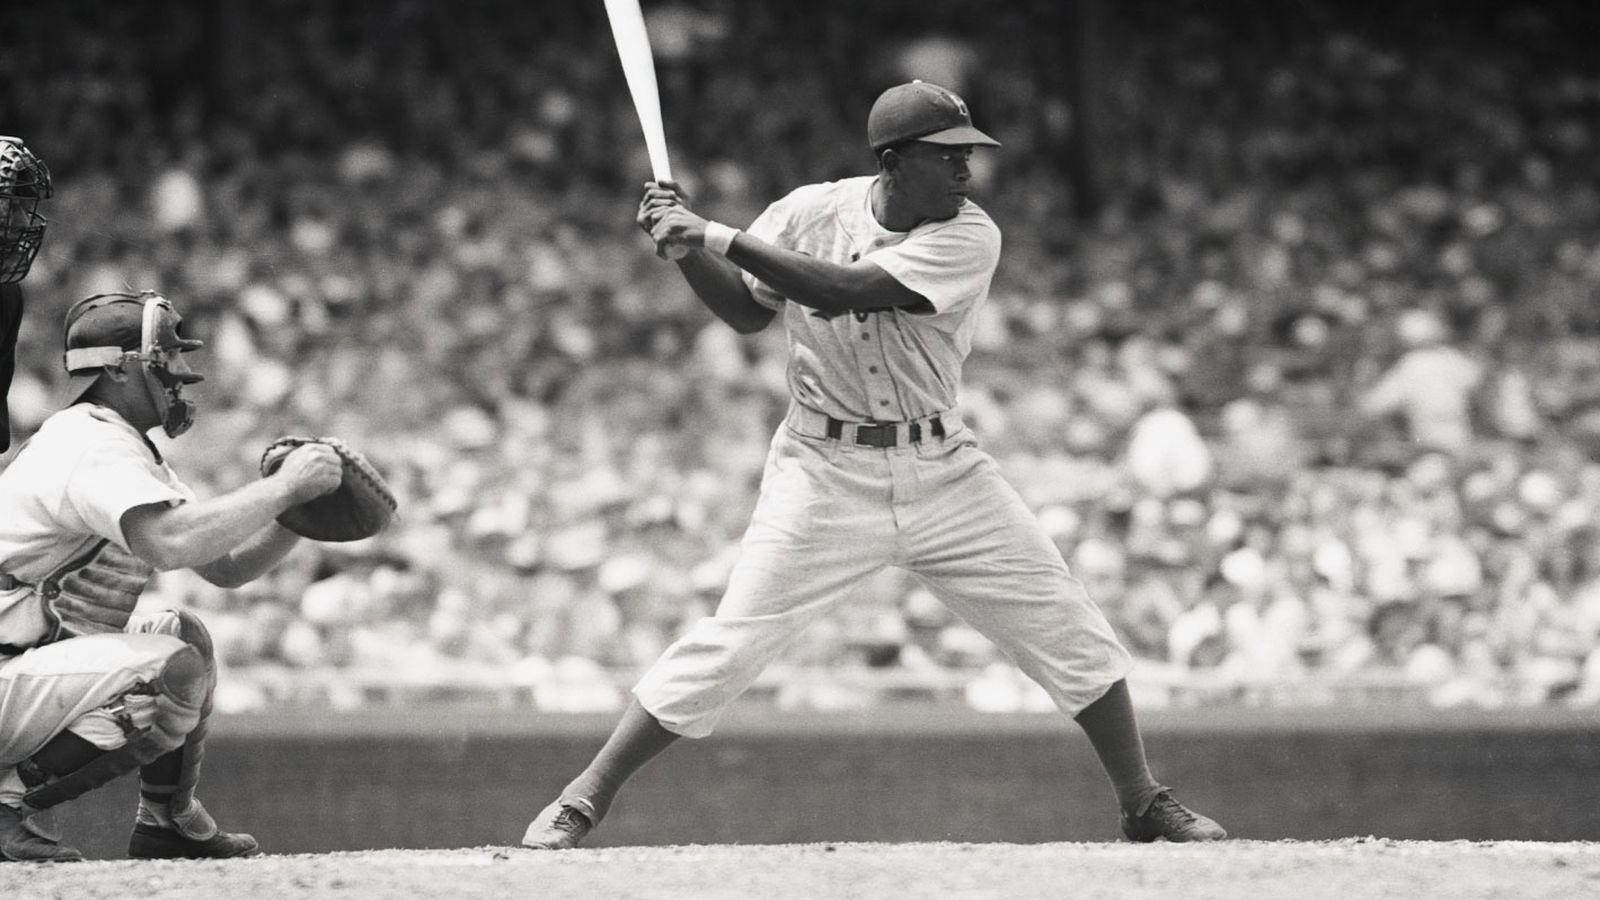 Jackie Robinson Day 4 Facts About His Jersey No 42 Now Retired in MLB